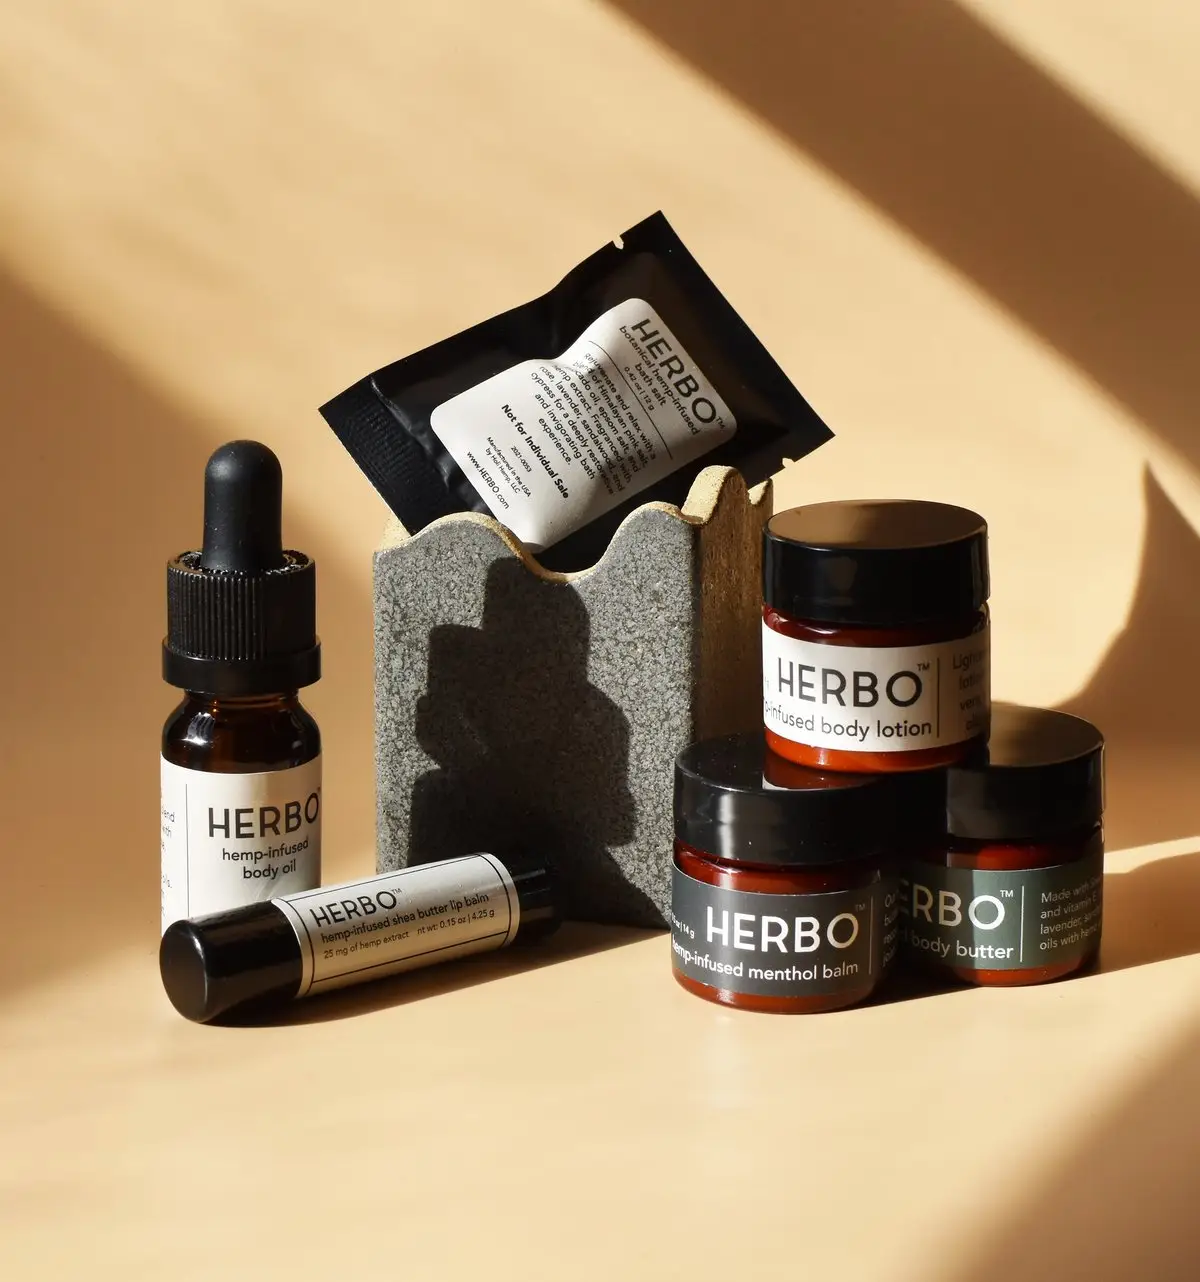 Herbo Hemp Discovery Box - Gift Set, Travel Self Care Kit, 6 Beauty Products for Men and Women, All-Day Skin Hydration